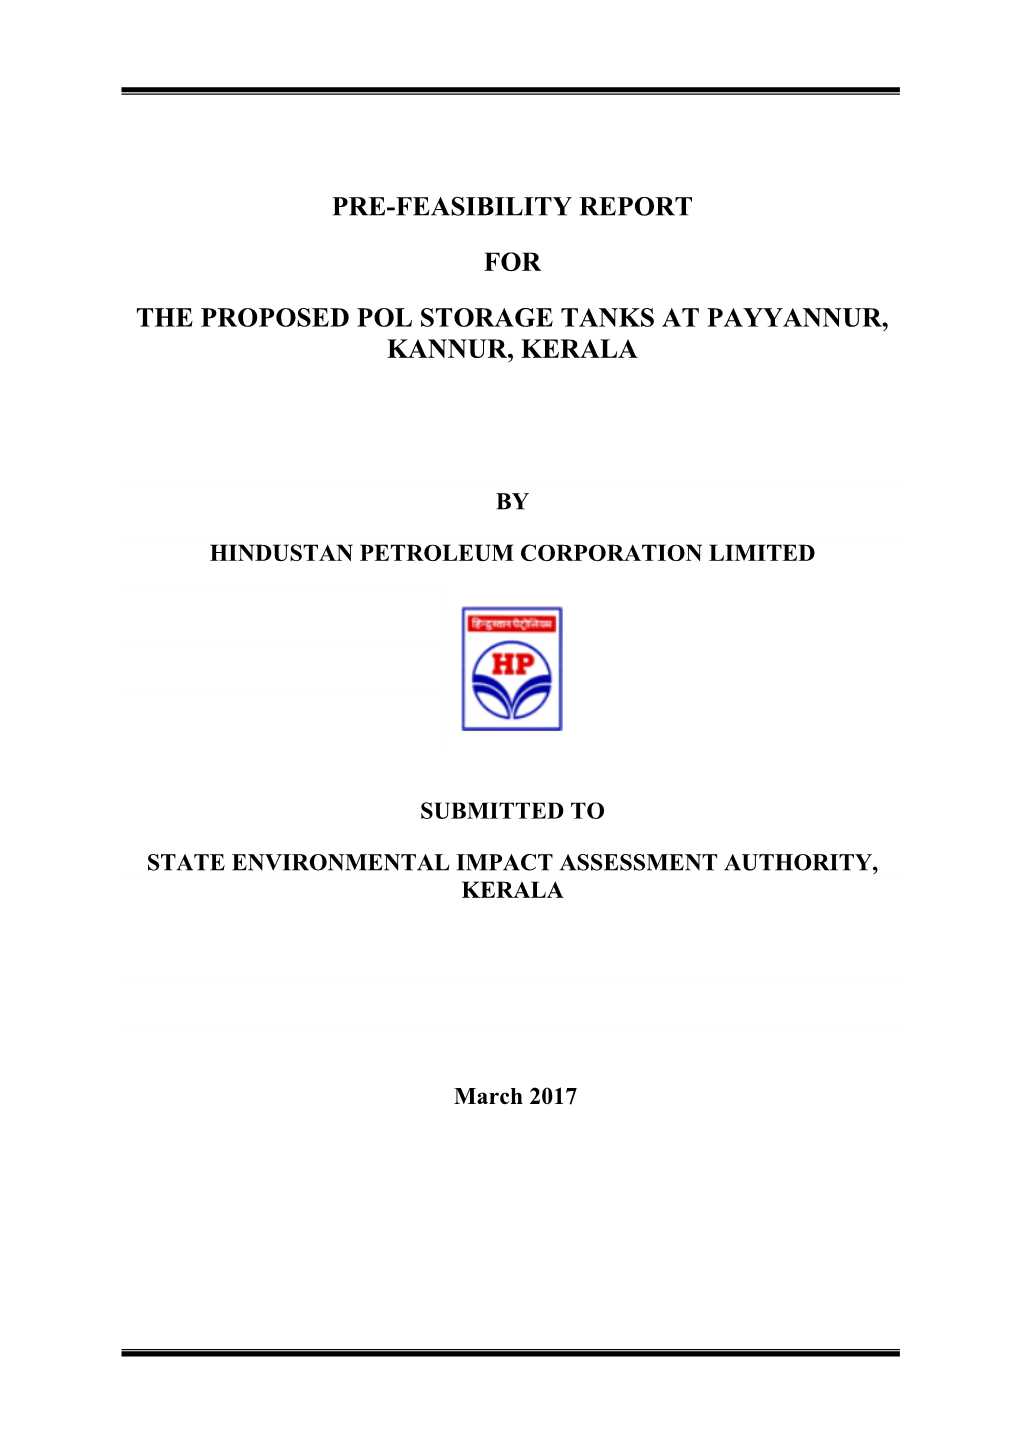 Pre-Feasibility Report for the Proposed Pol Storage Tanks at Payyannur, Kannur, Kerala